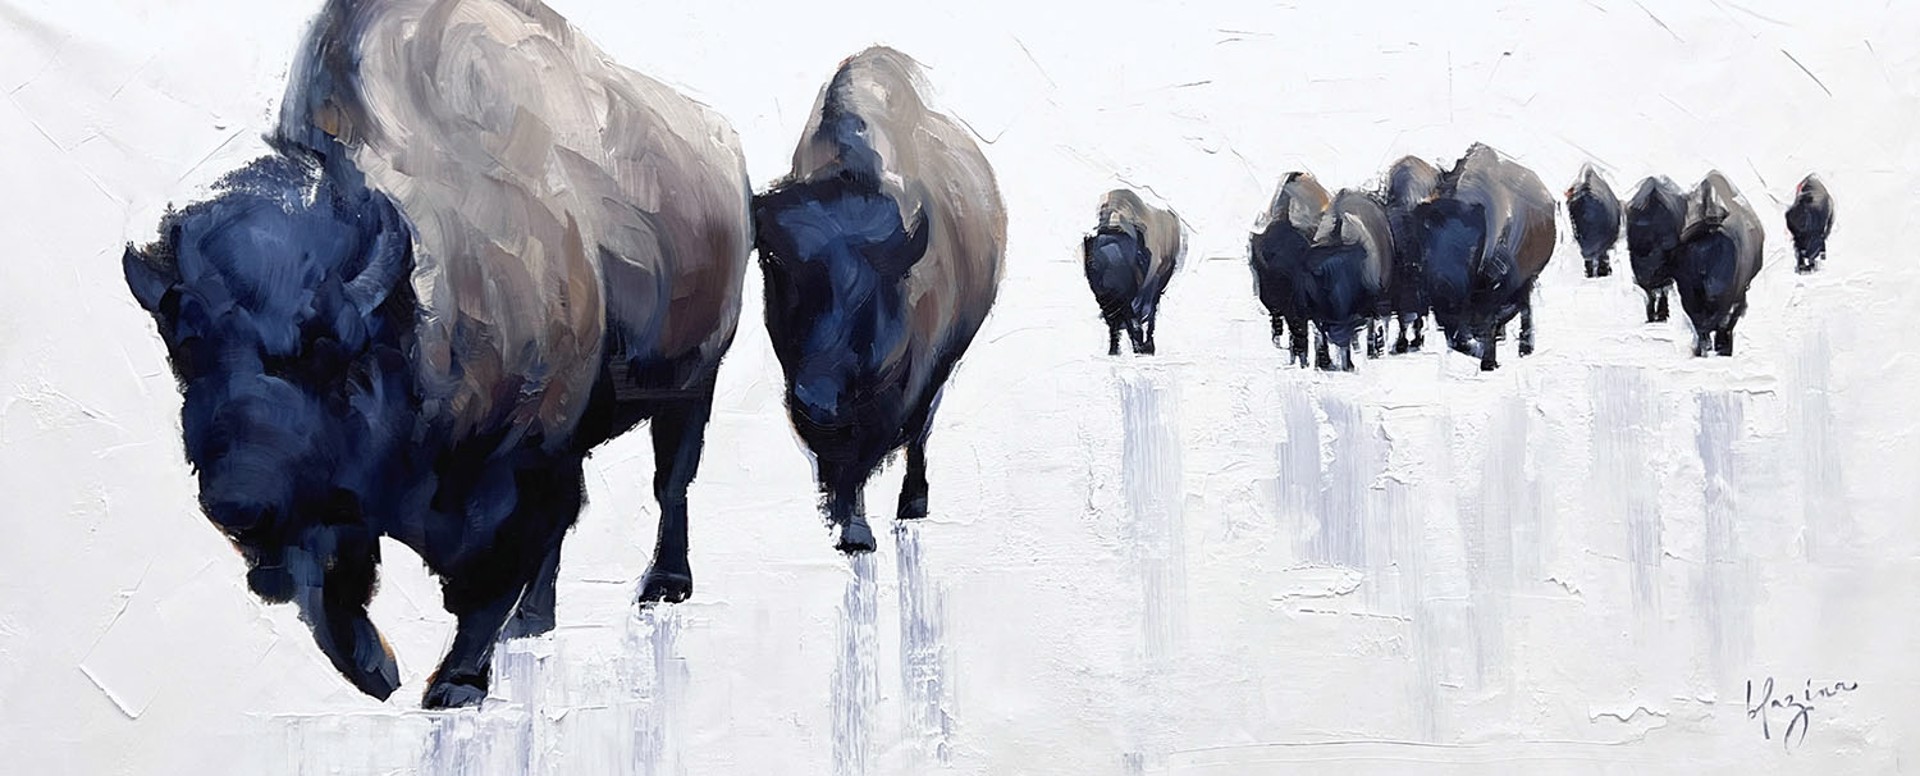 Original Oil Painting Featuring Bison Heard Walking On Snowy Background